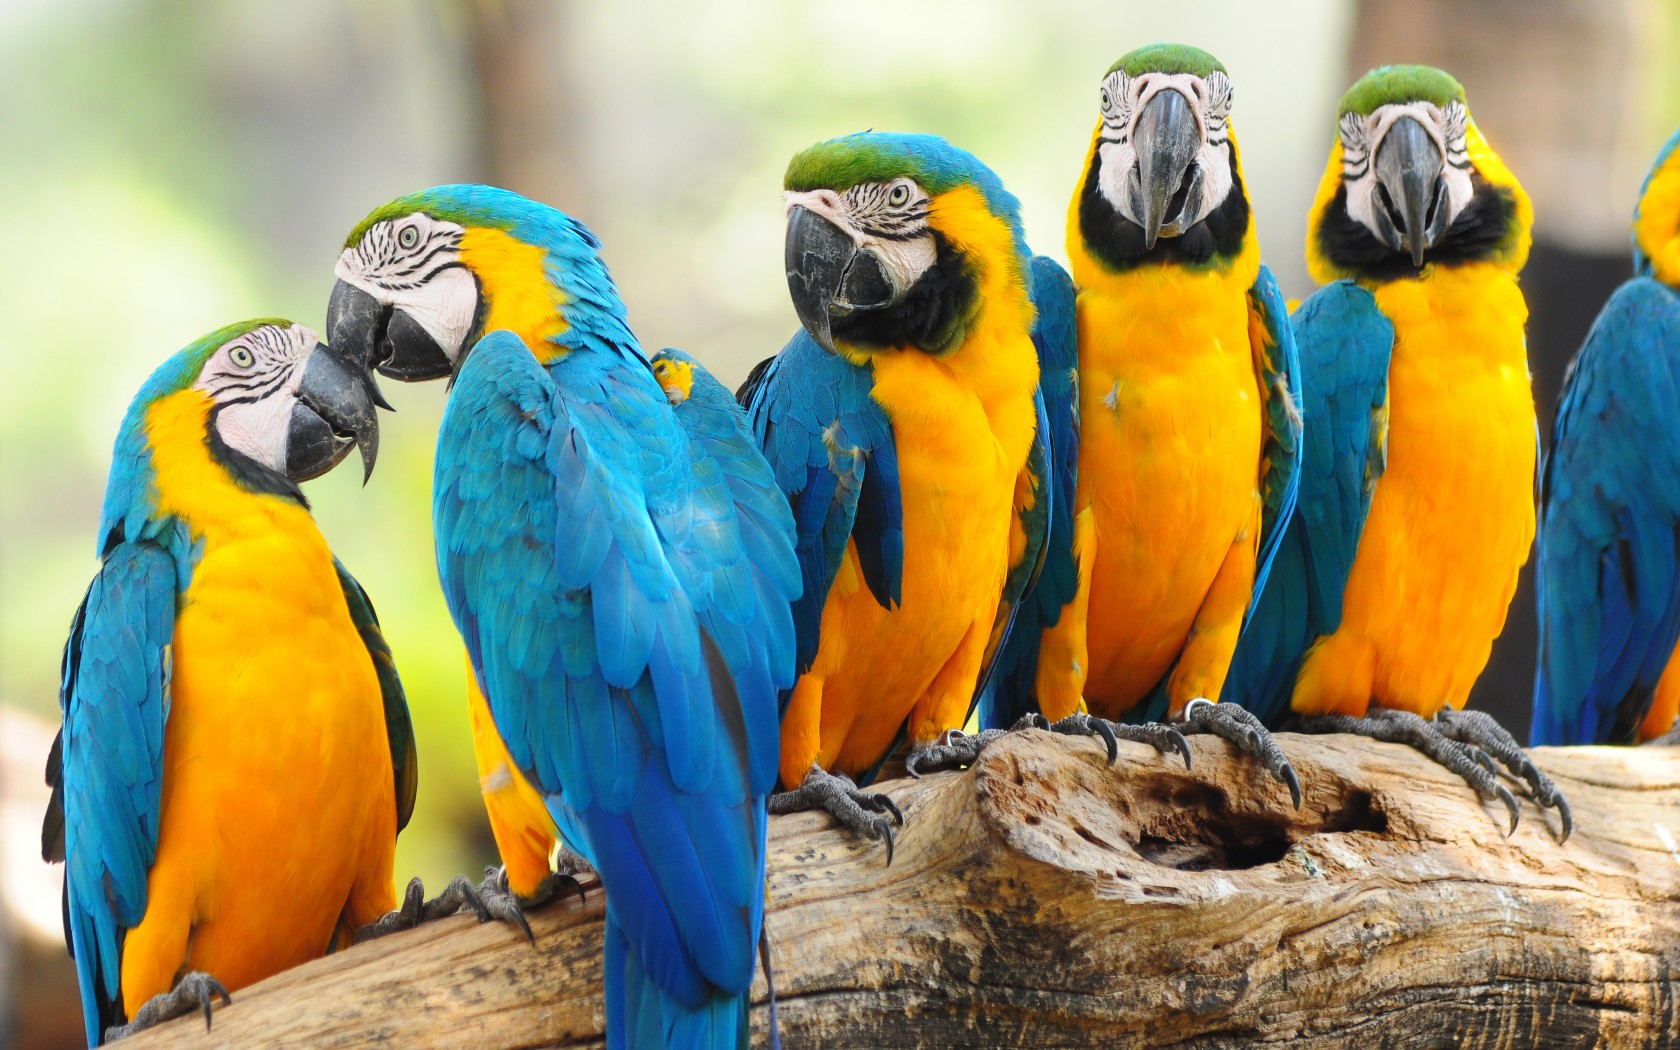 Macaw Parrot Wallpapers   1680x1050   413150